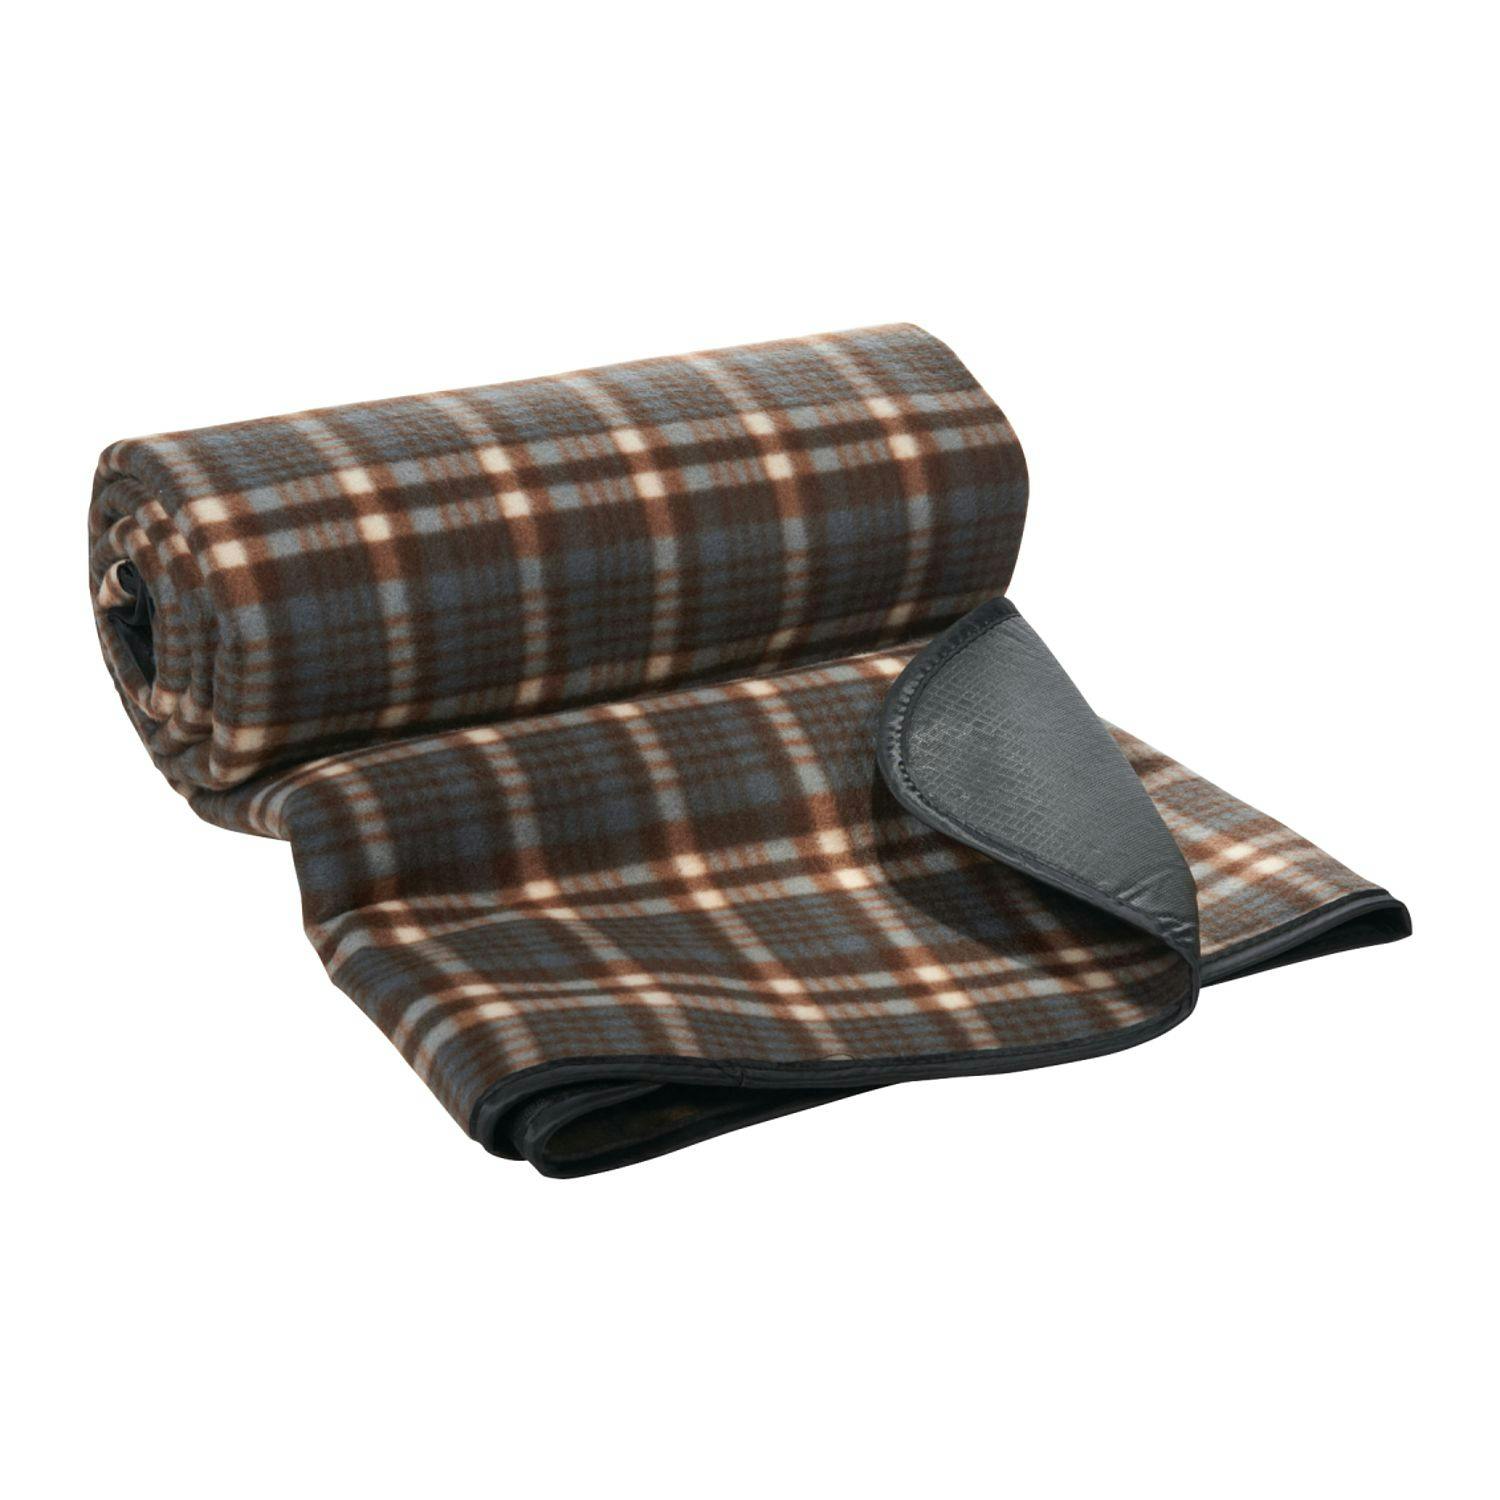 Field & Co.® Picnic Blanket - additional Image 3